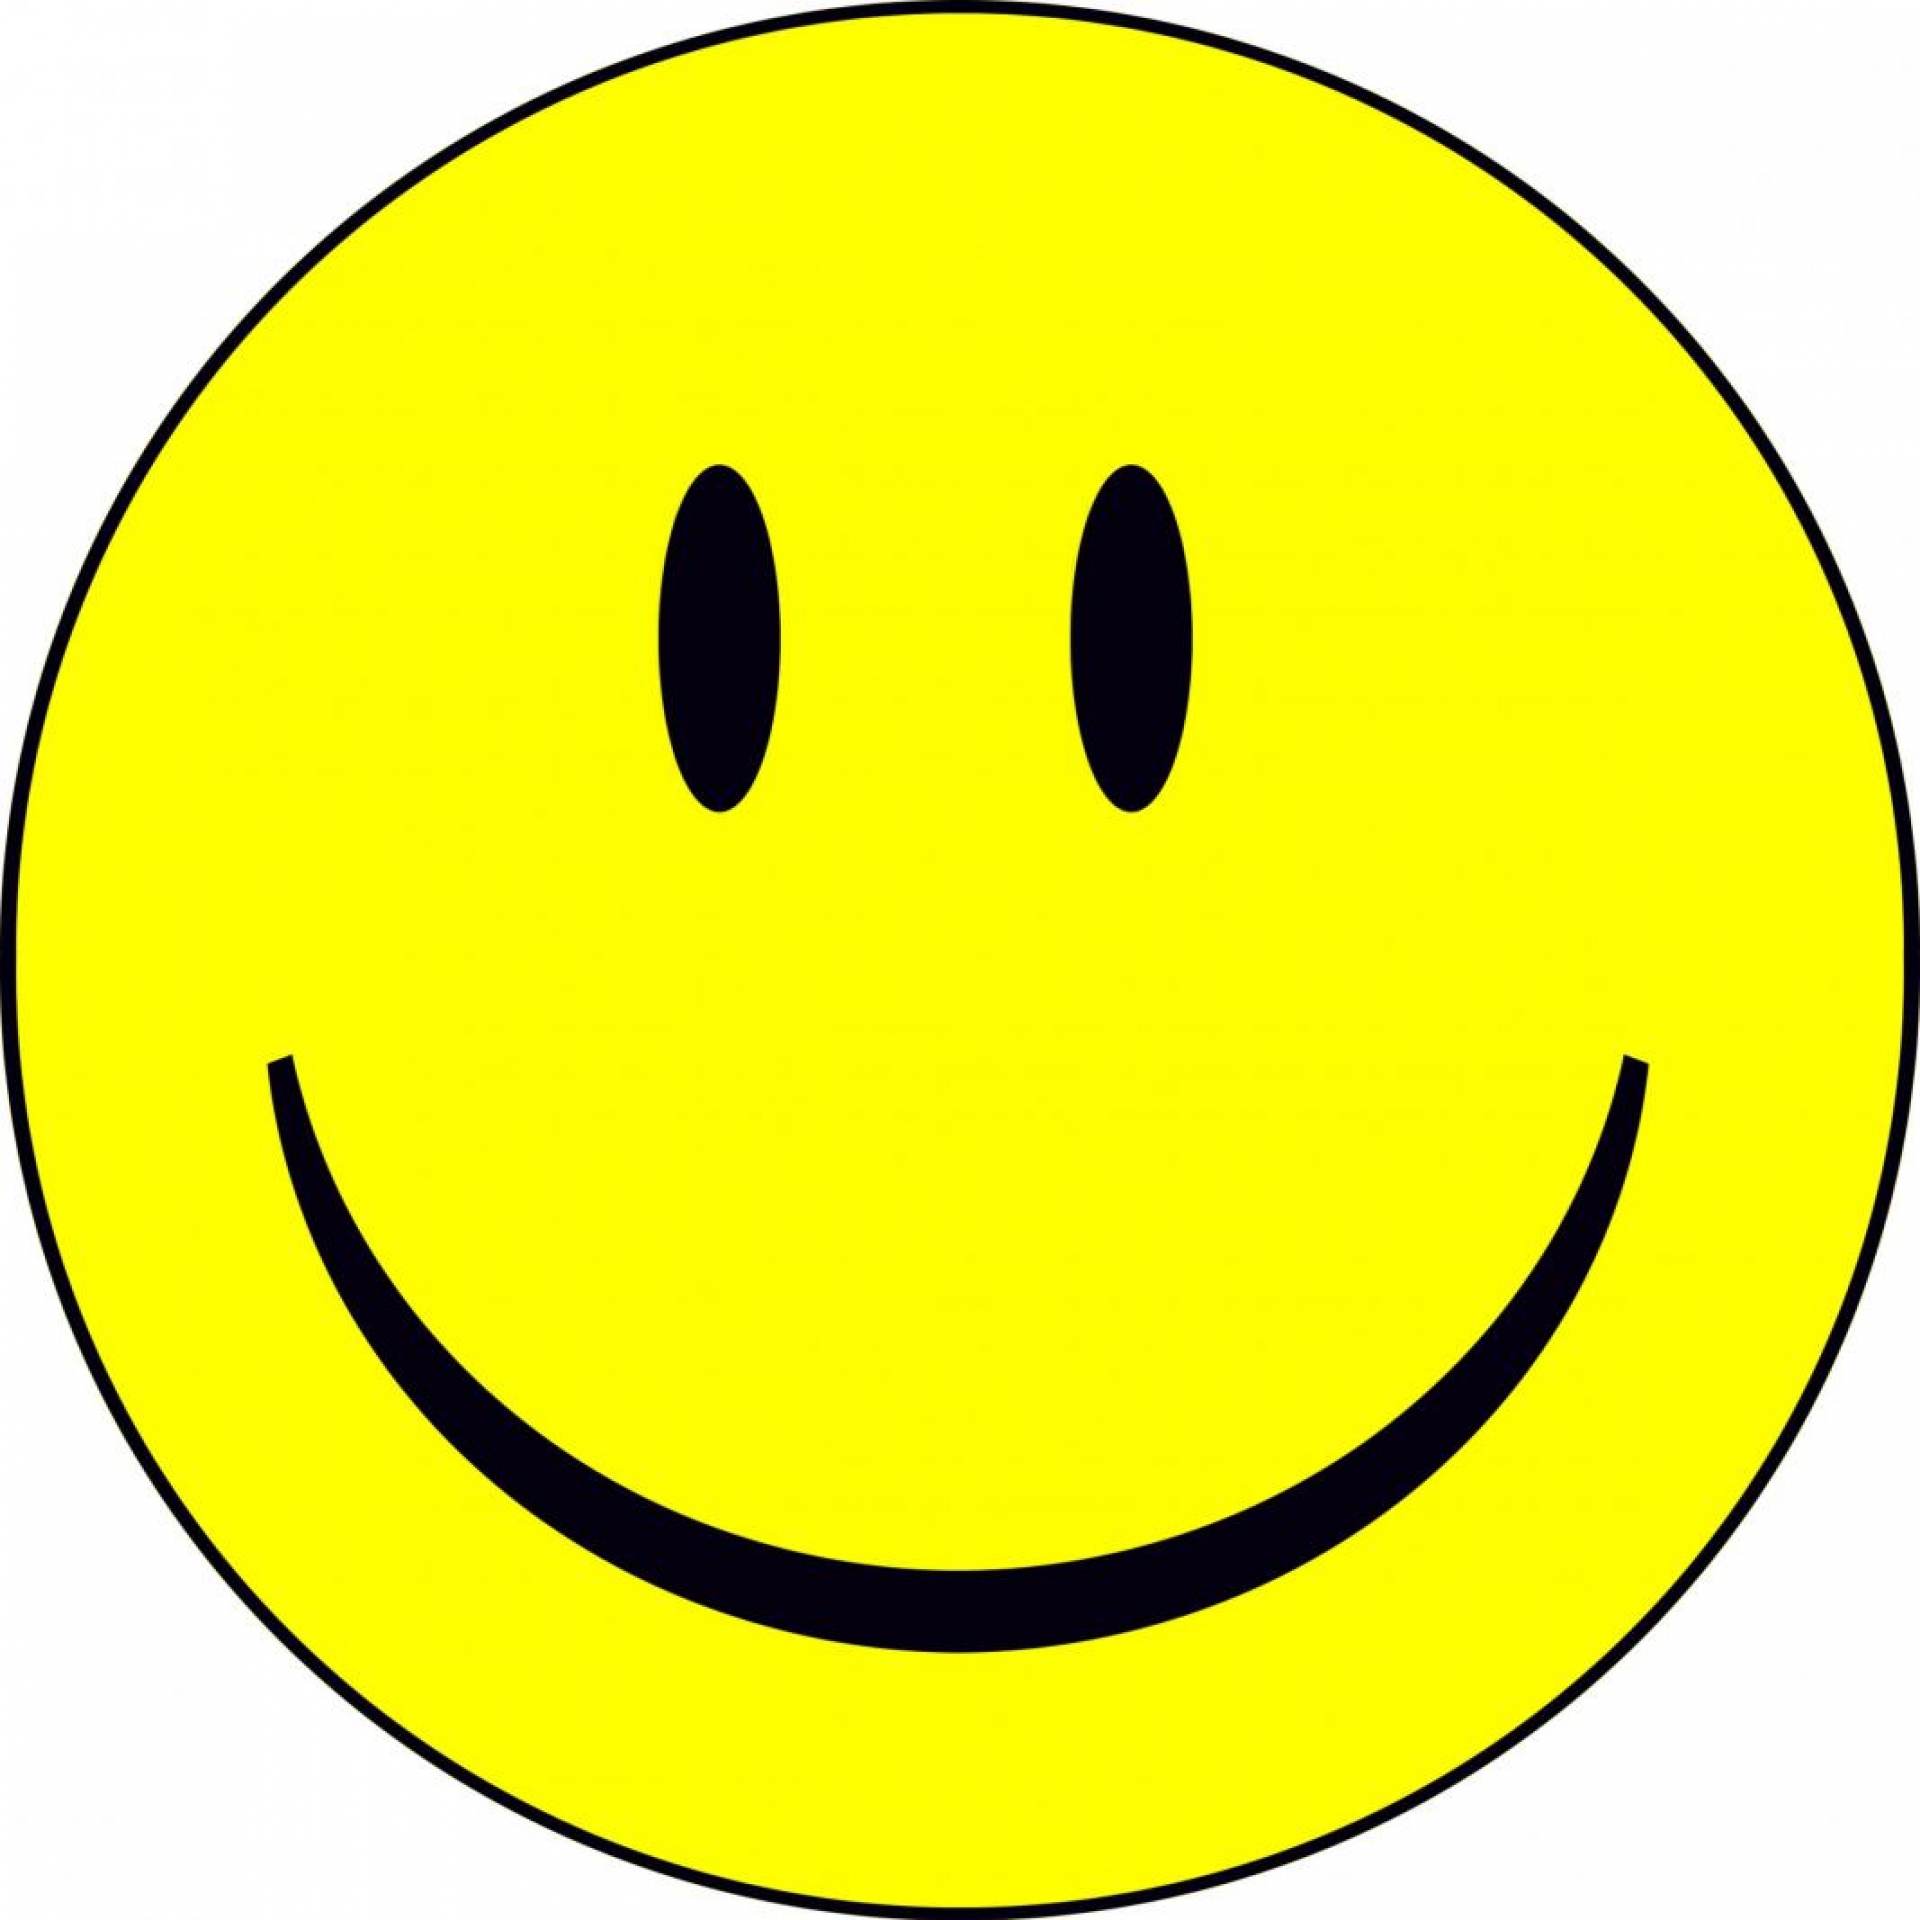 Funny Cartoon Smiles - ClipArt Best